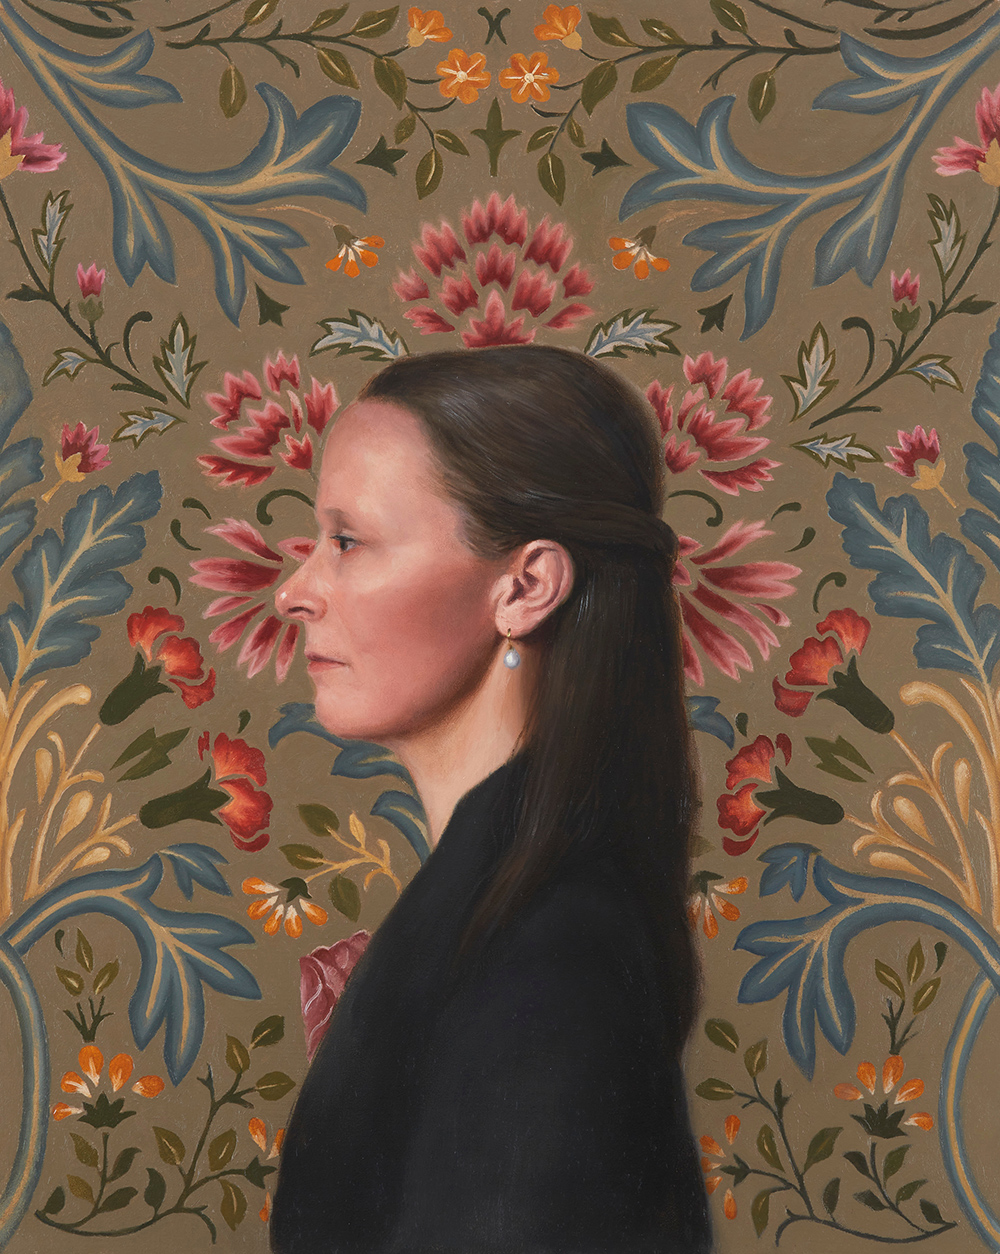 Painting of a woman with a wall paper background